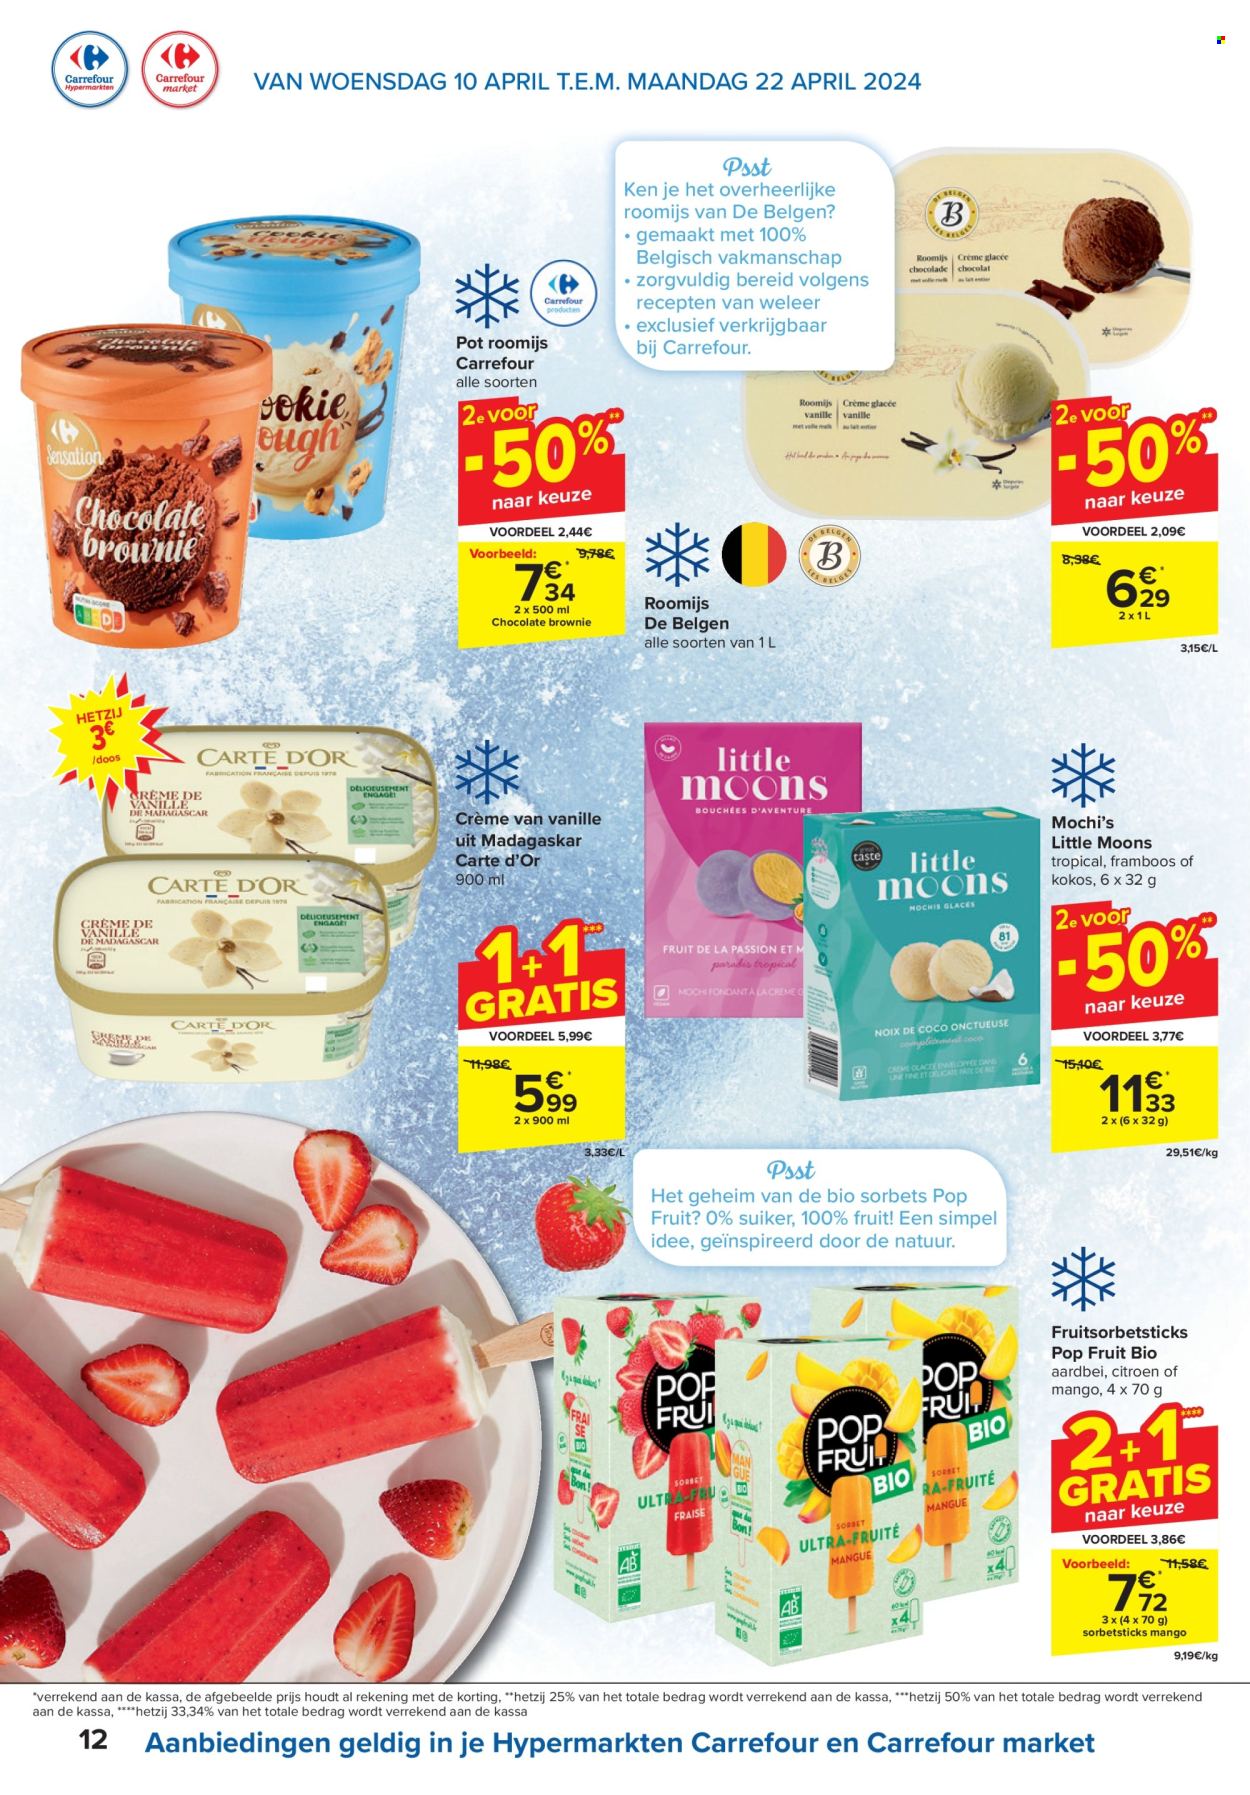 Catalogue Carrefour hypermarkt - 10.4.2024 - 22.4.2024. Page 12.